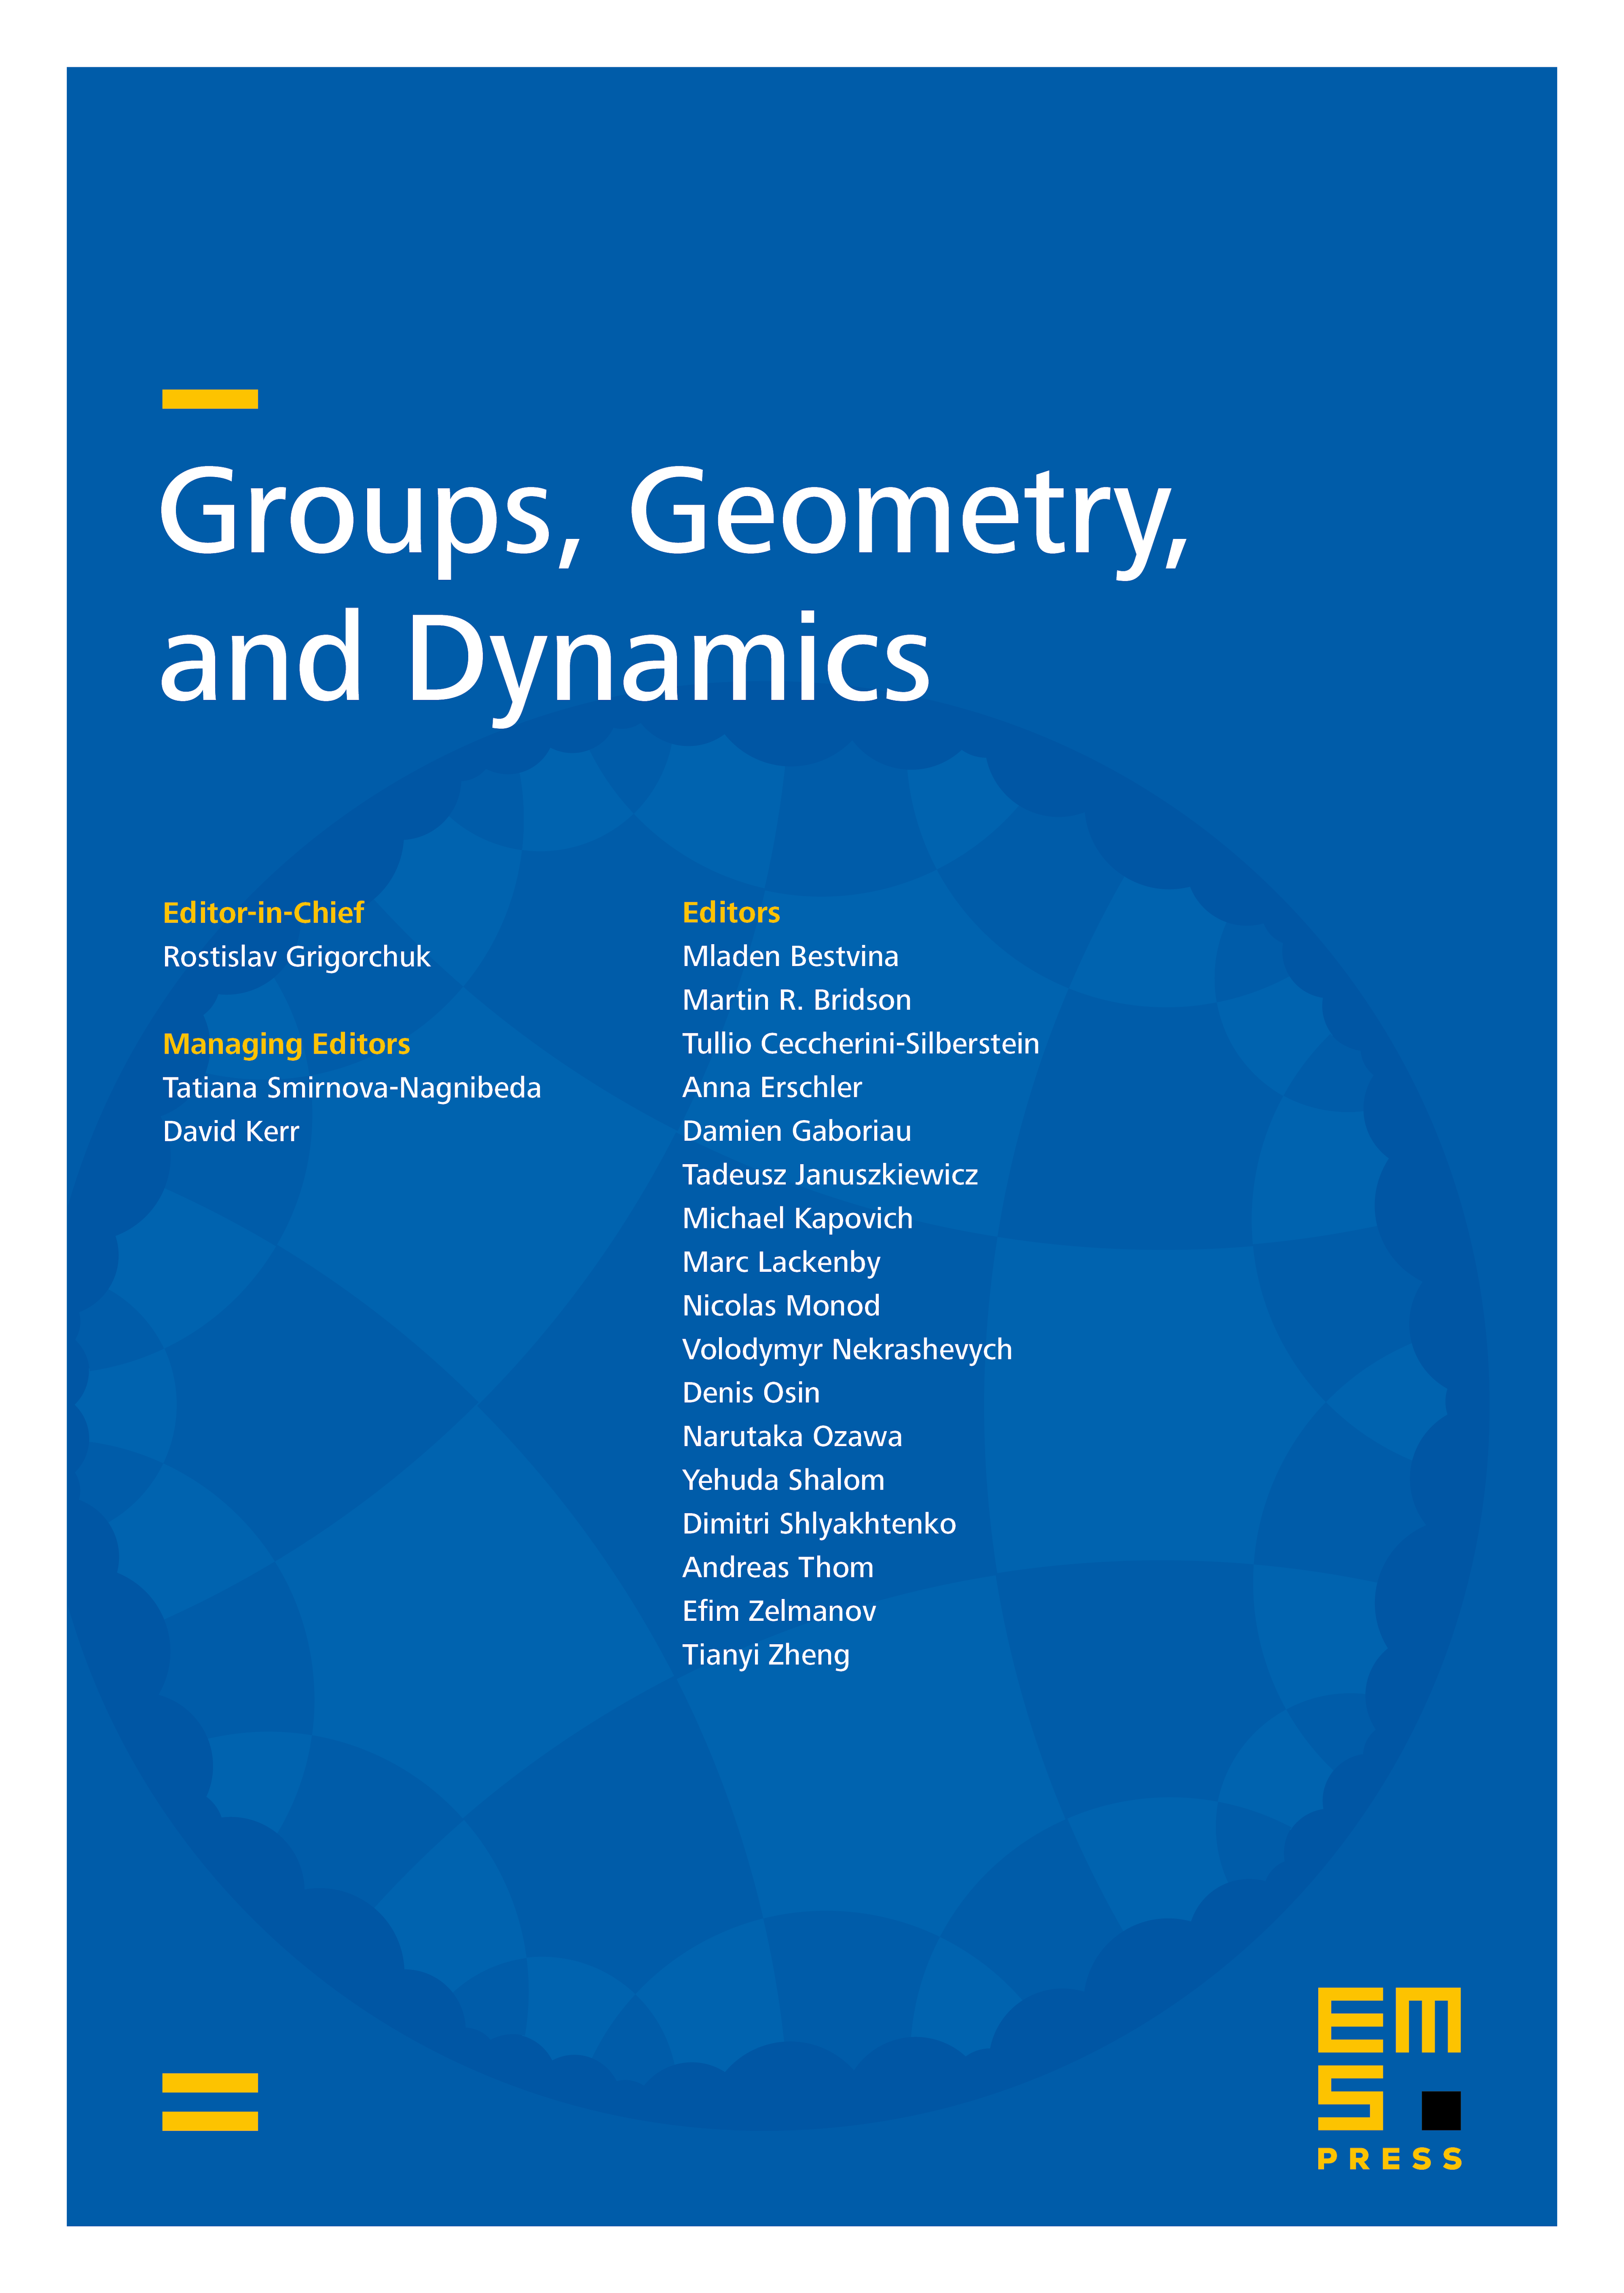 Abstract group actions of locally compact groups on CAT(0) spaces cover